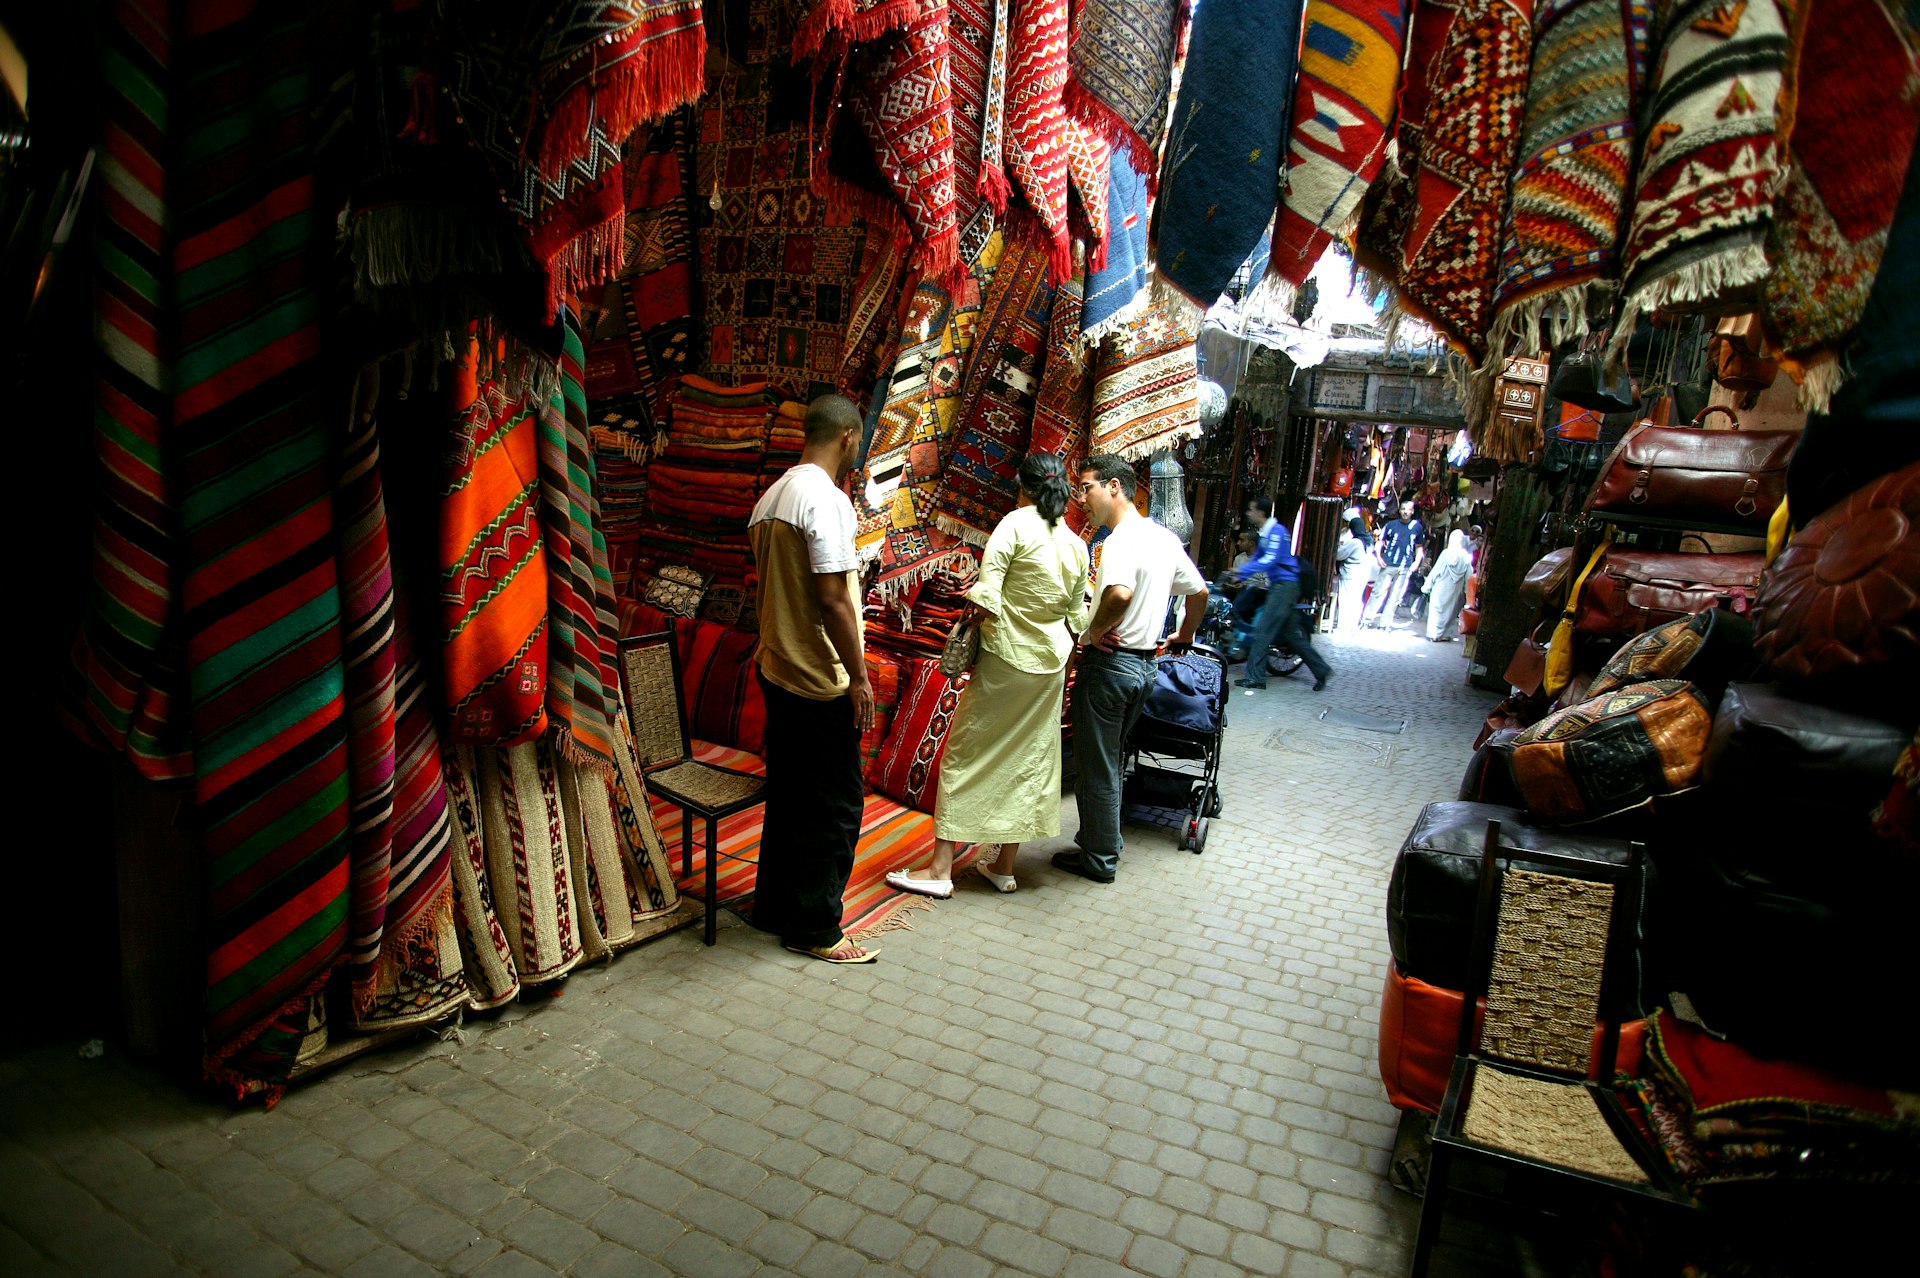 Rug sellers outside Criee Berbere, the carpet market in Marrakesh, Morocco